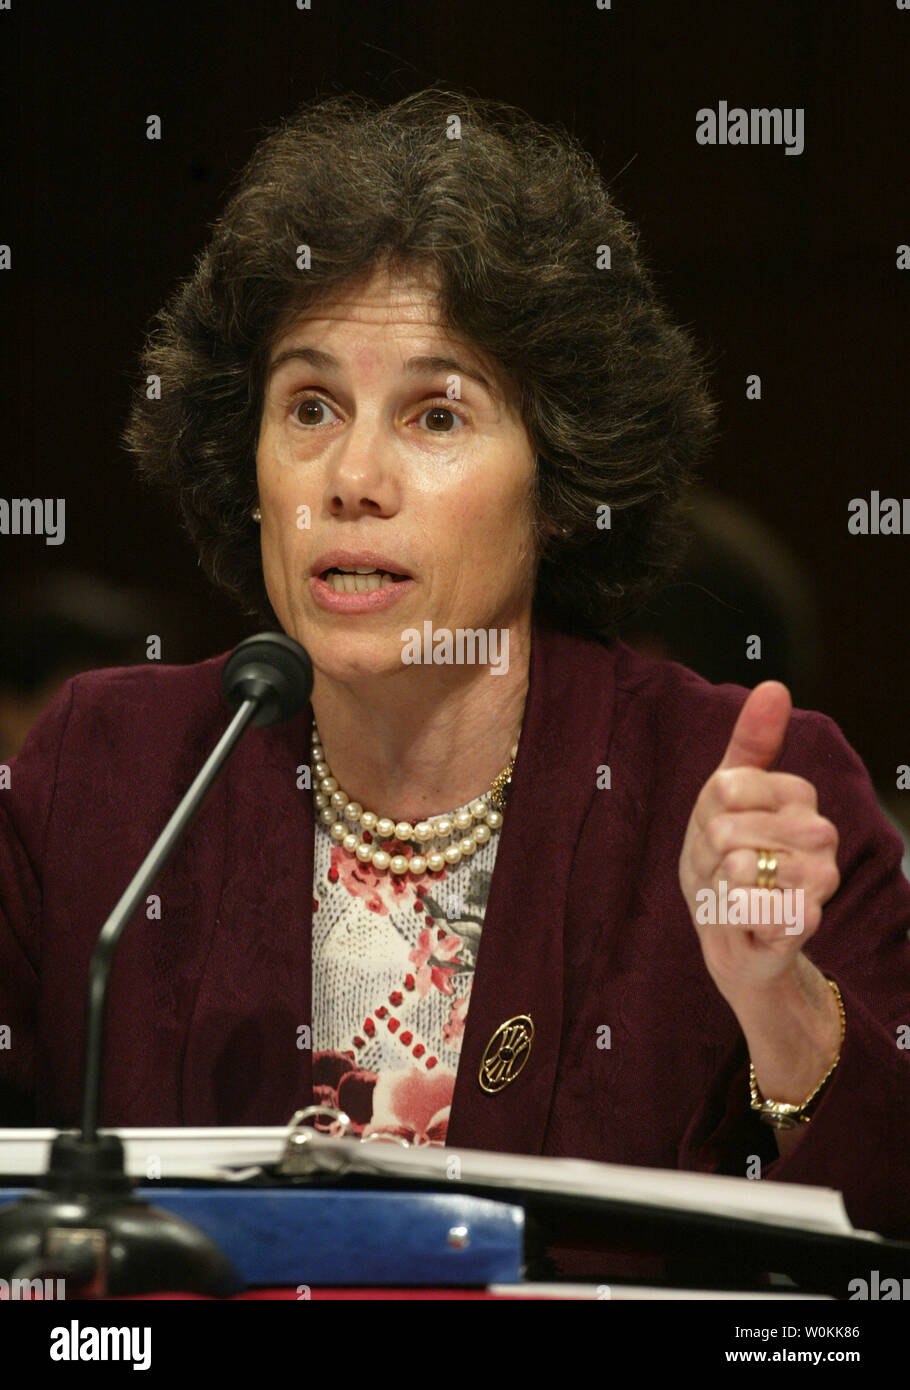 Judith Resnik, Arthur Liman Professor of Law, Yale Law School, New Haven, CT testifies before the Senate Judiciary Committee during the fourth day of U.S. Chief Justice Nominee Judge John Roberts confirmation hearing on Capitol Hill in Washington on Sept. 15, 2005. (UPI Photo/Yuri Gripas) Stock Photo